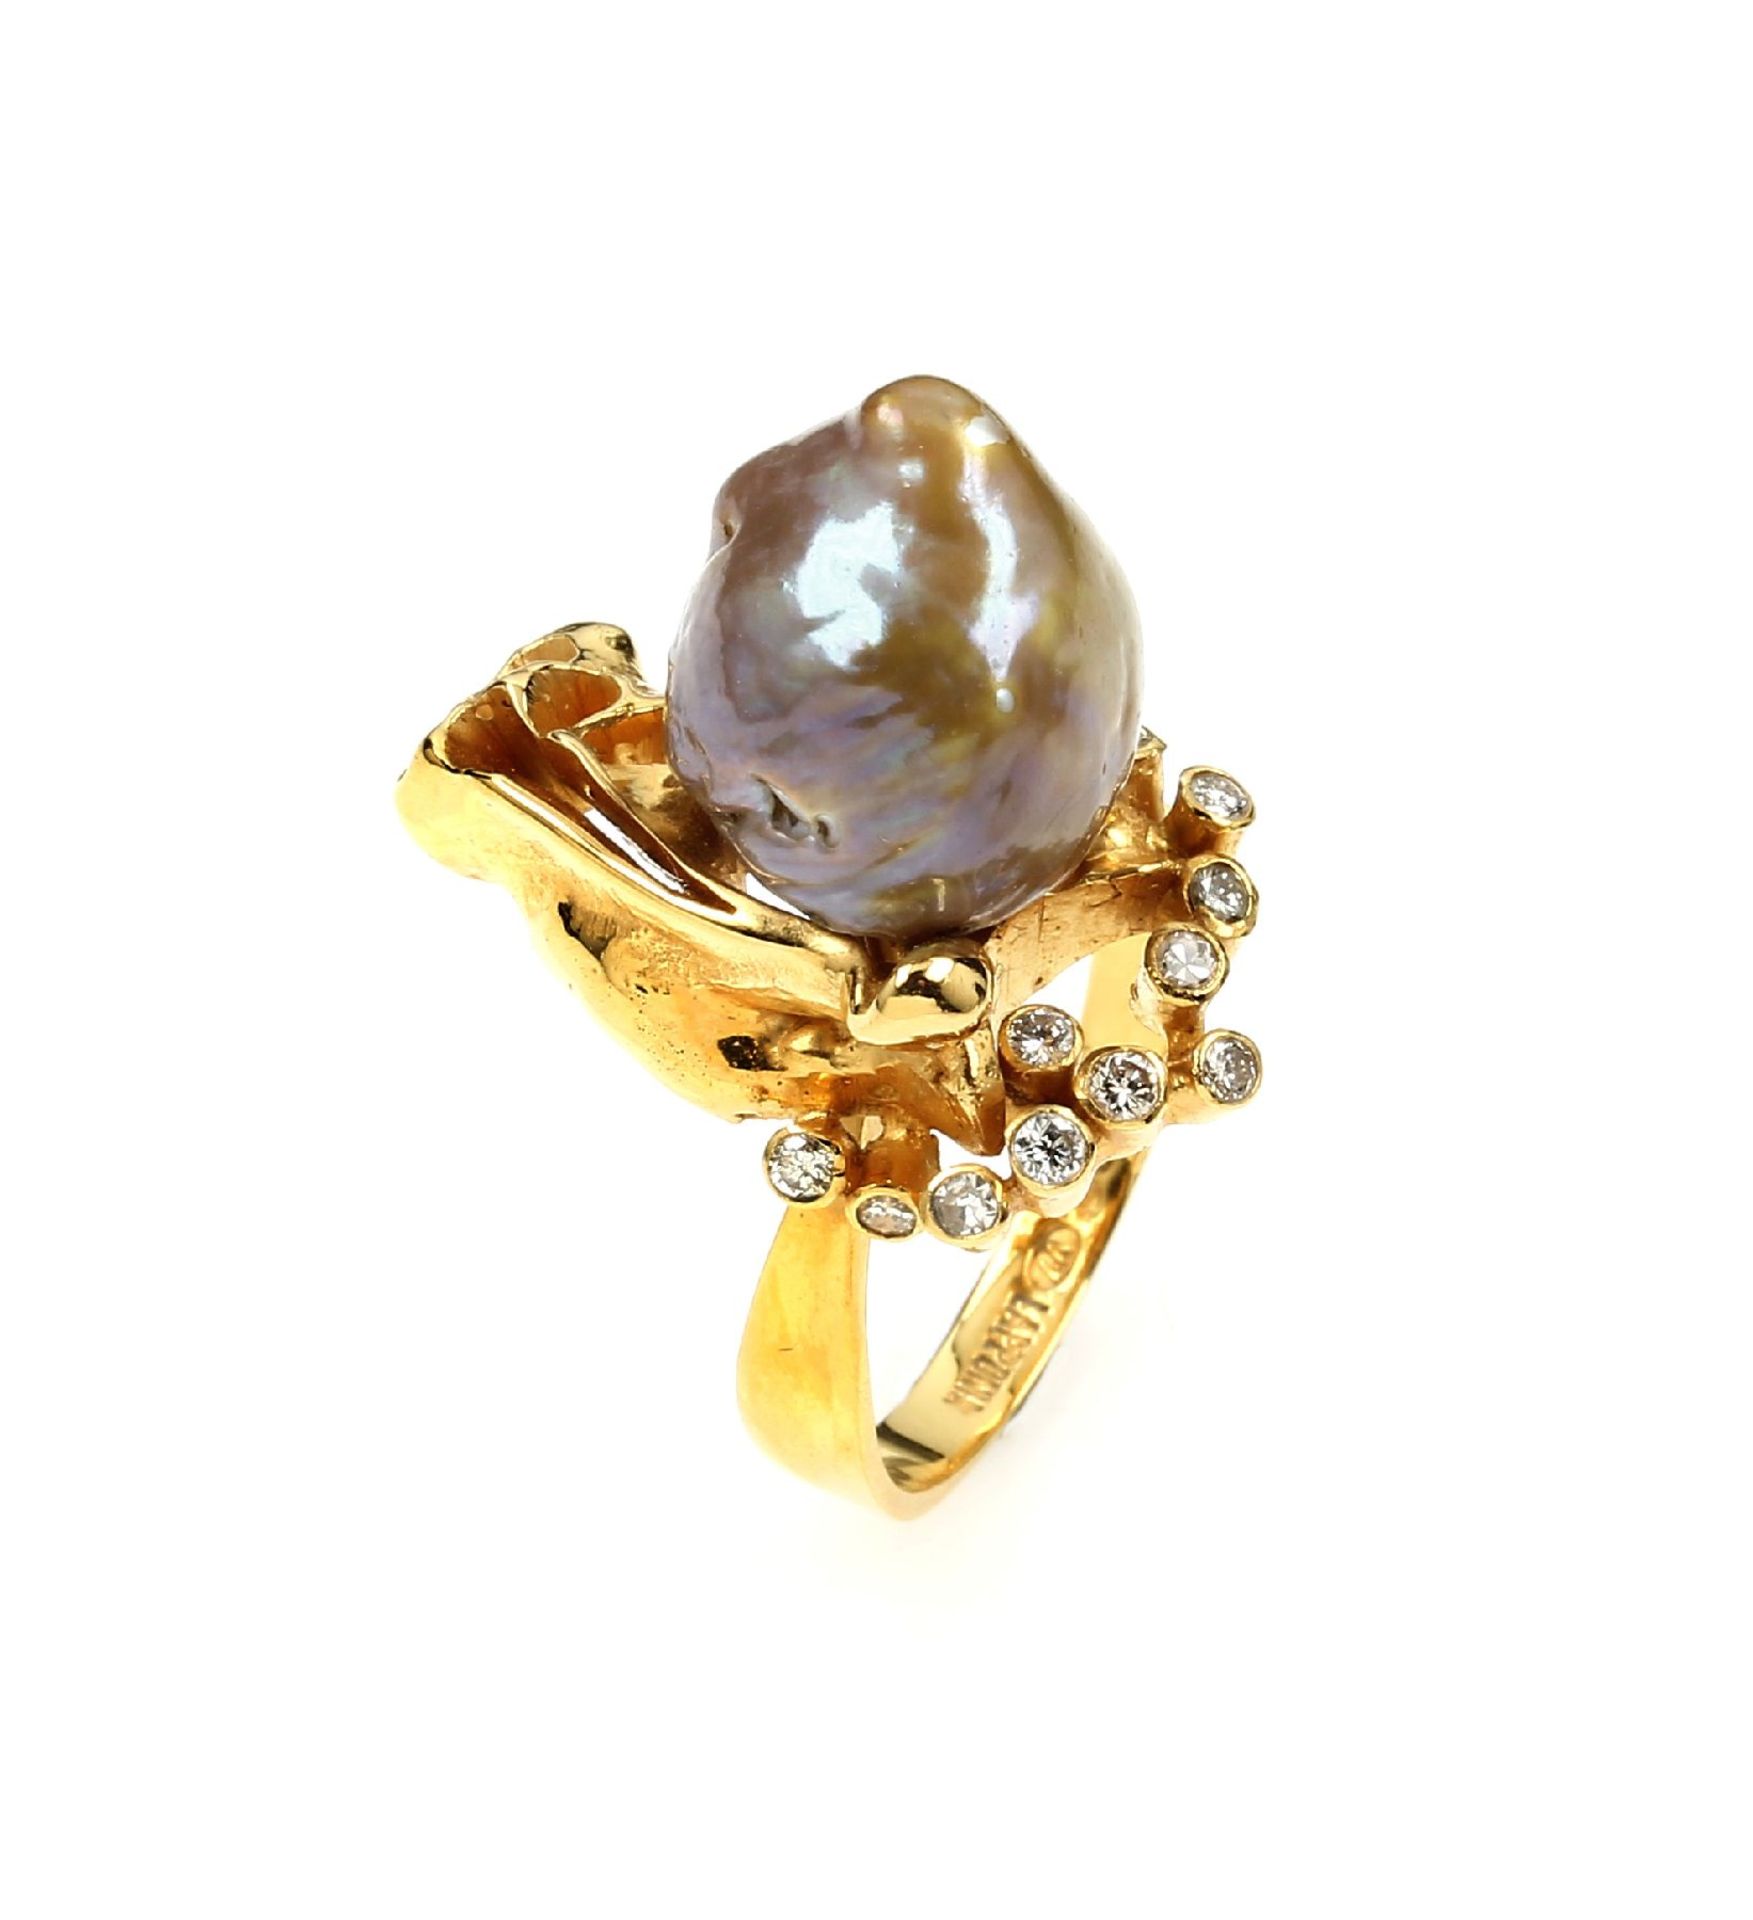 18 kt gold LAPPONIA ring with diamonds and cultured south seas pearl , YG 750/000, Finland 1974, 1